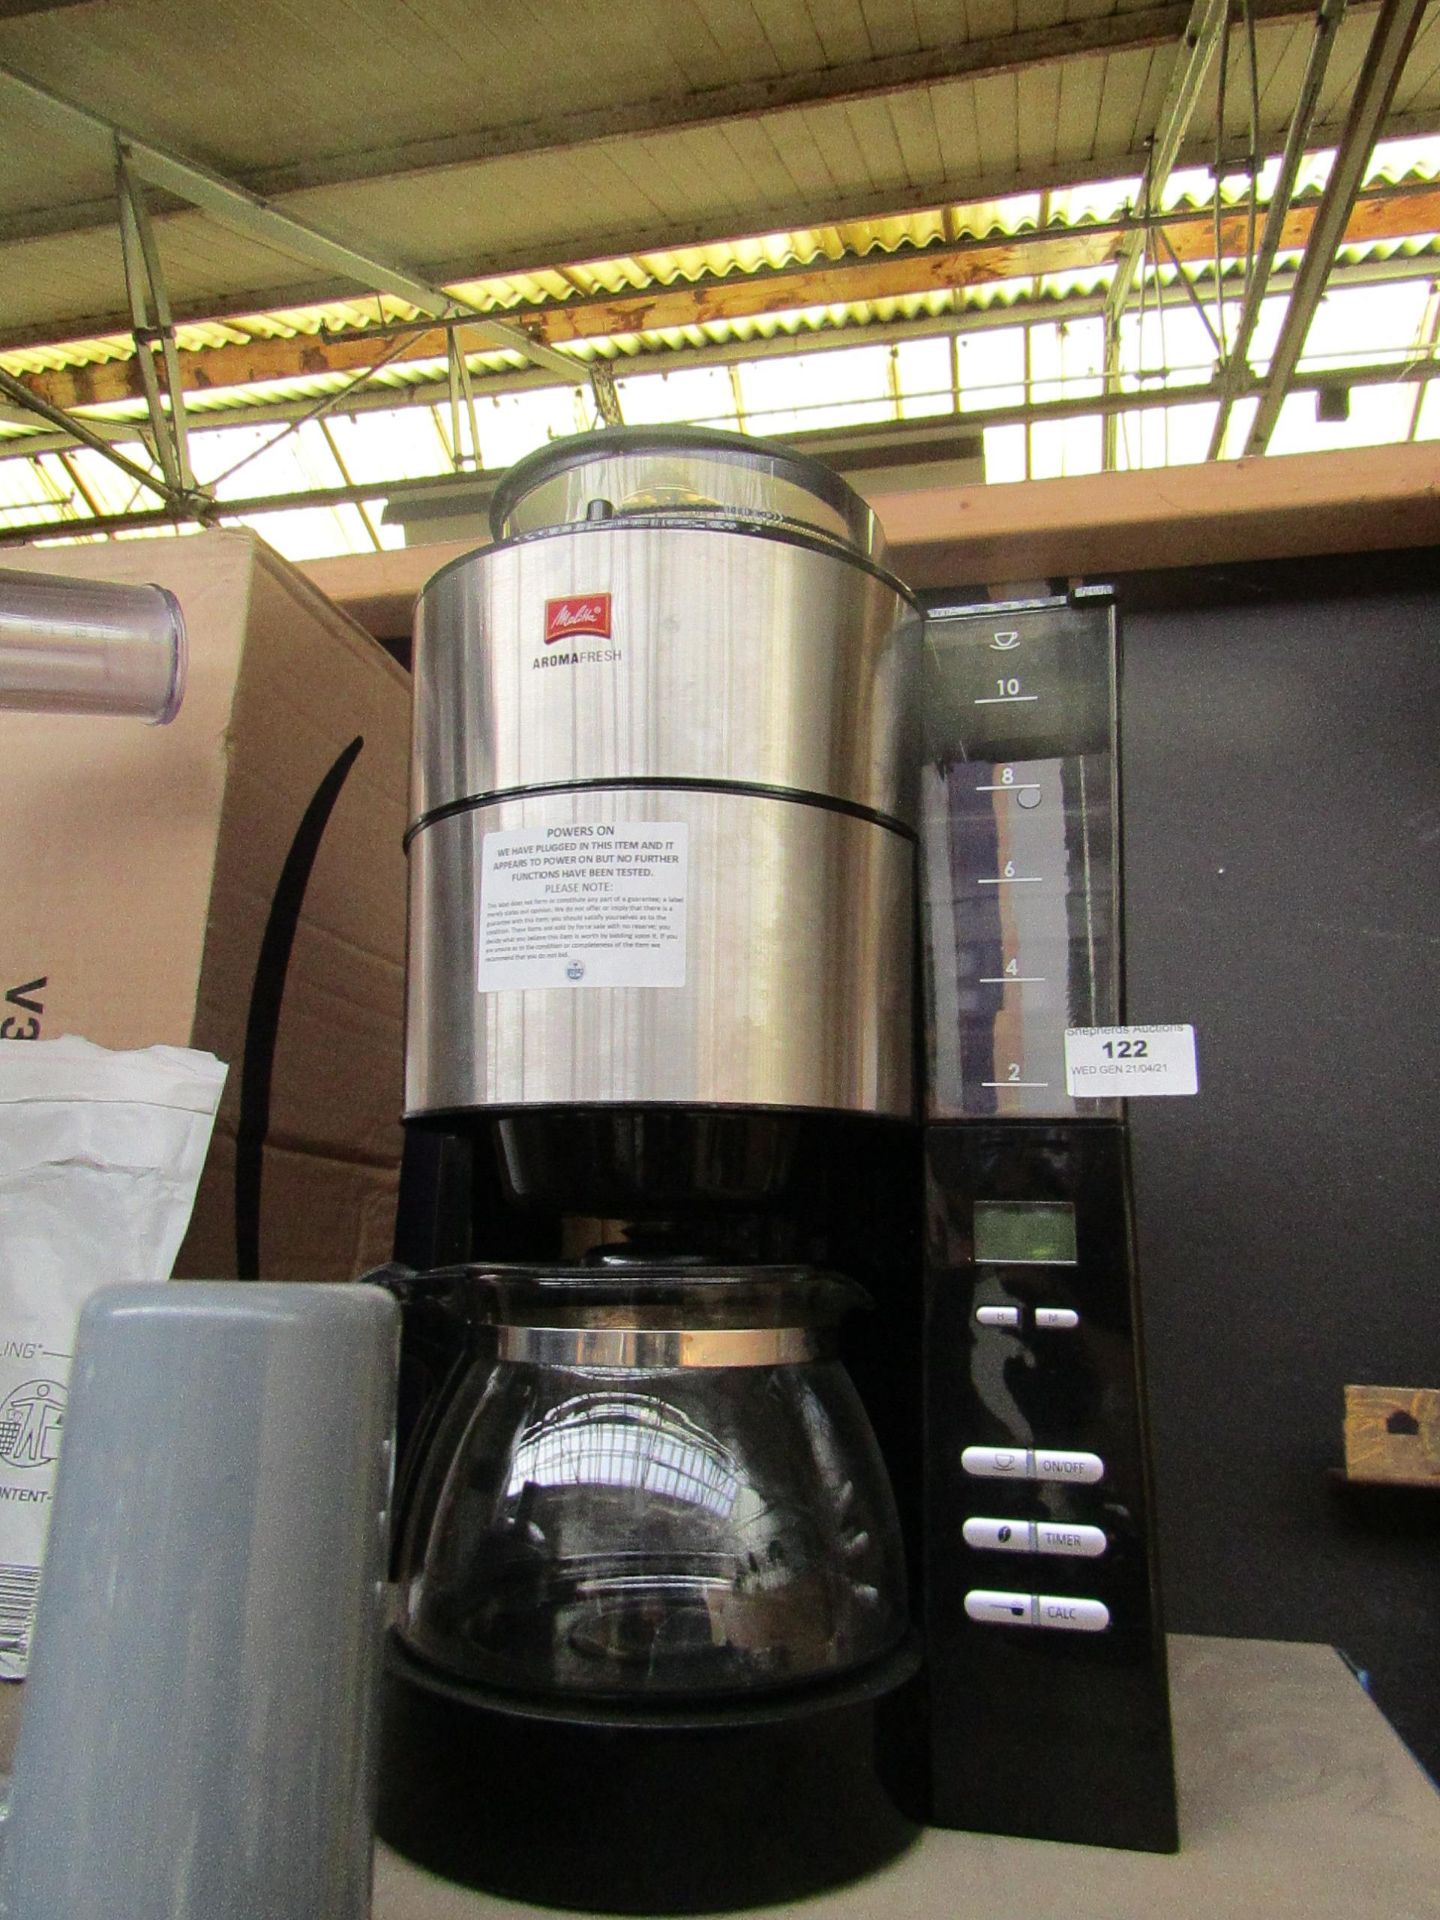 Mellita bean to cup coffee machine, powers on but not tested all functions. RRP Circa £250